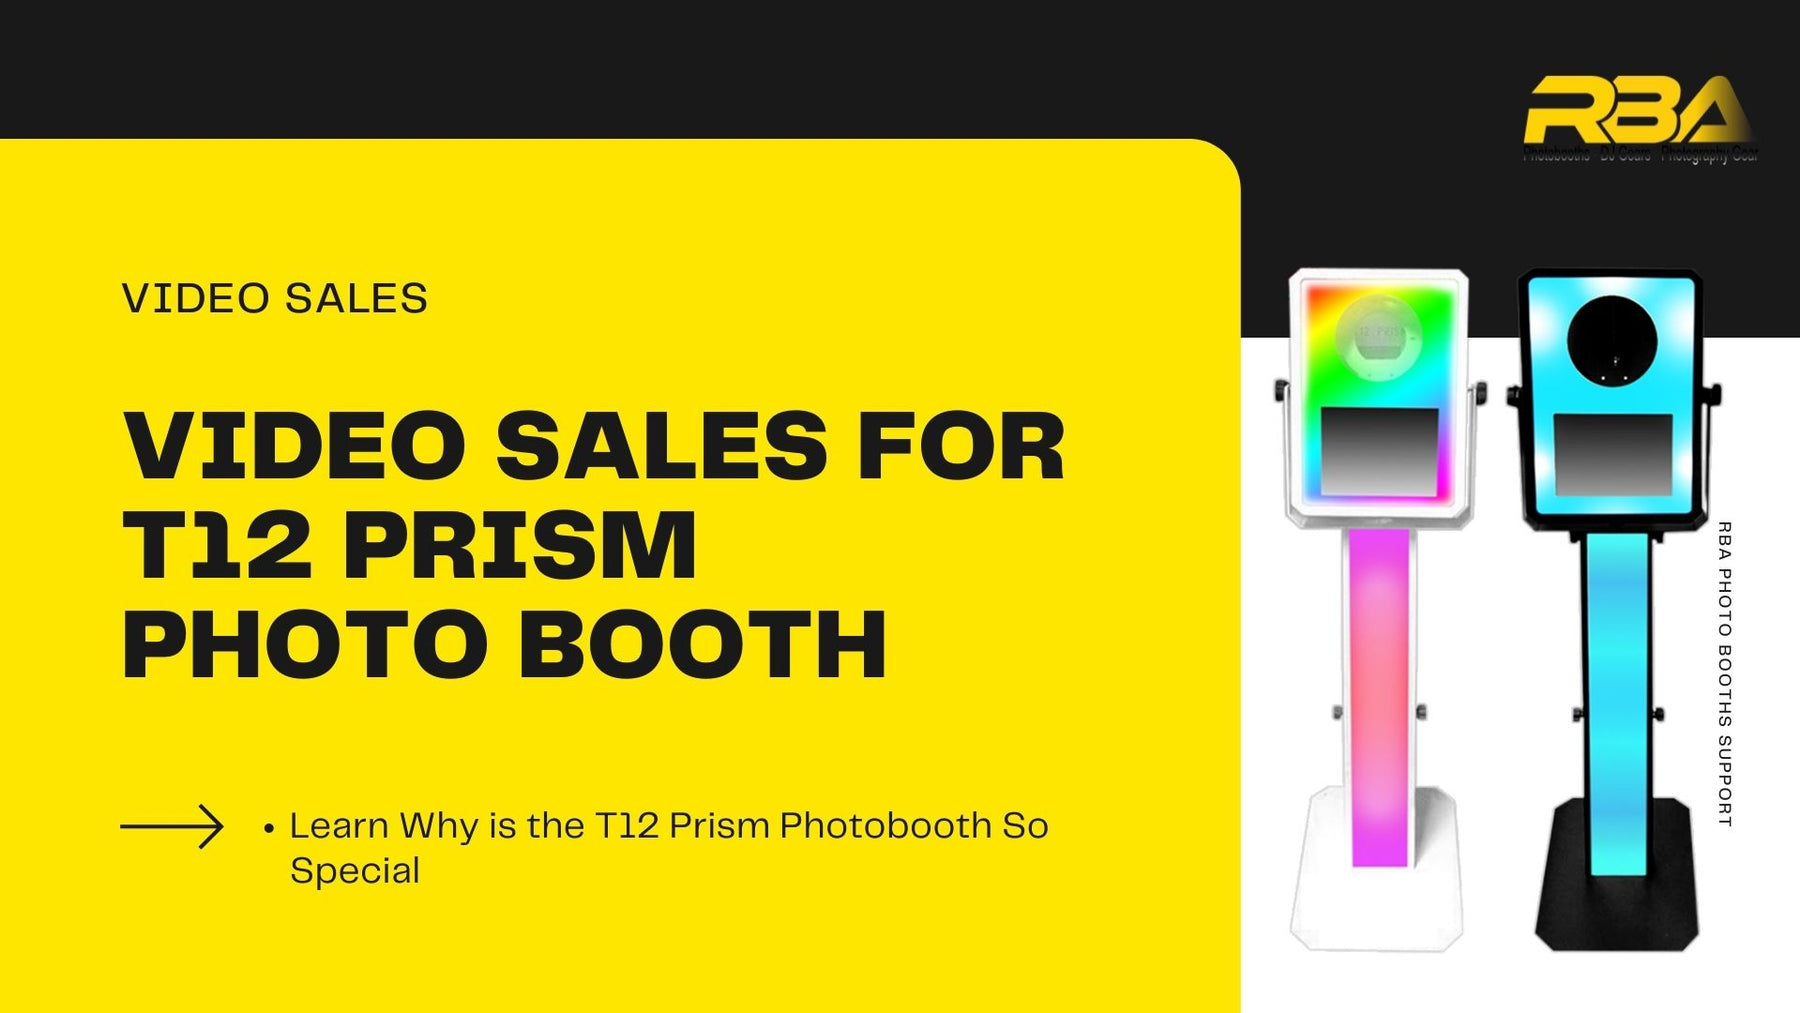 Video Sales for T12 Prism Photo Booth